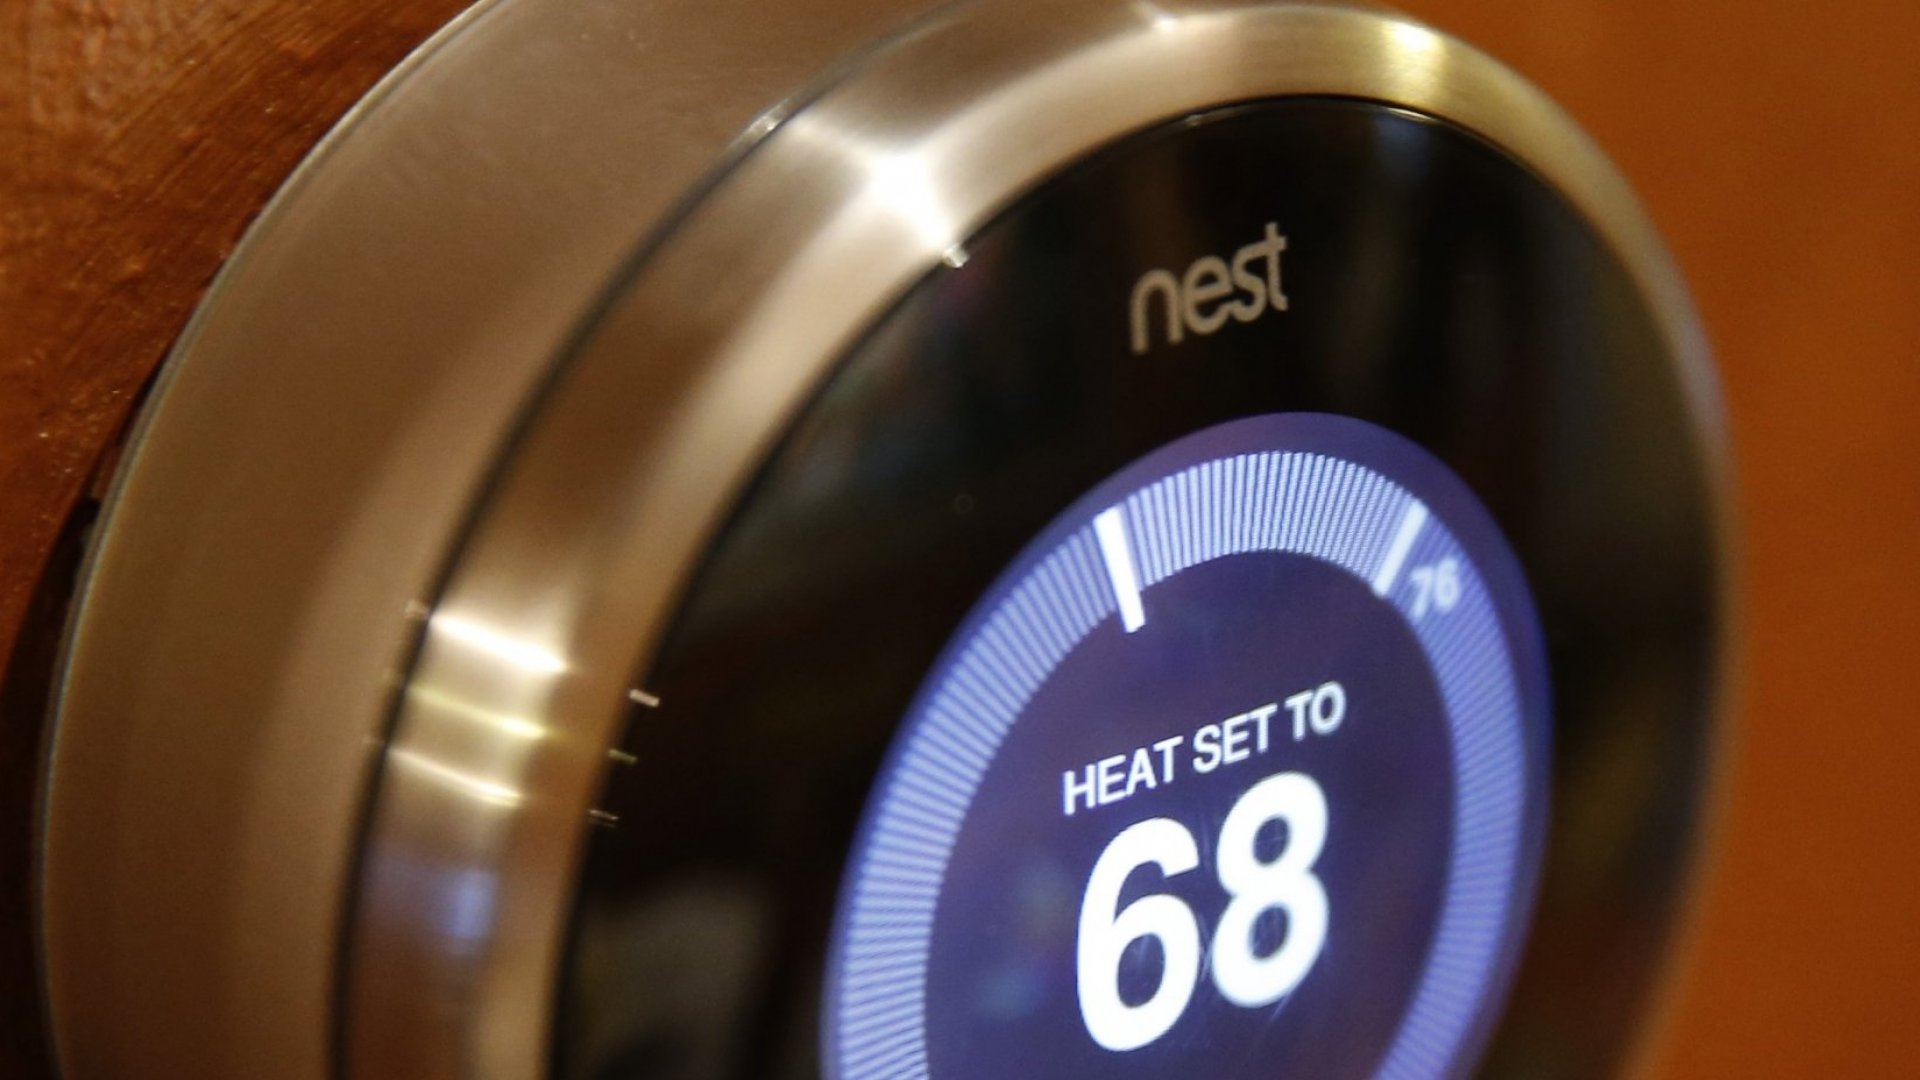 Why Buy A Nest Thermostat